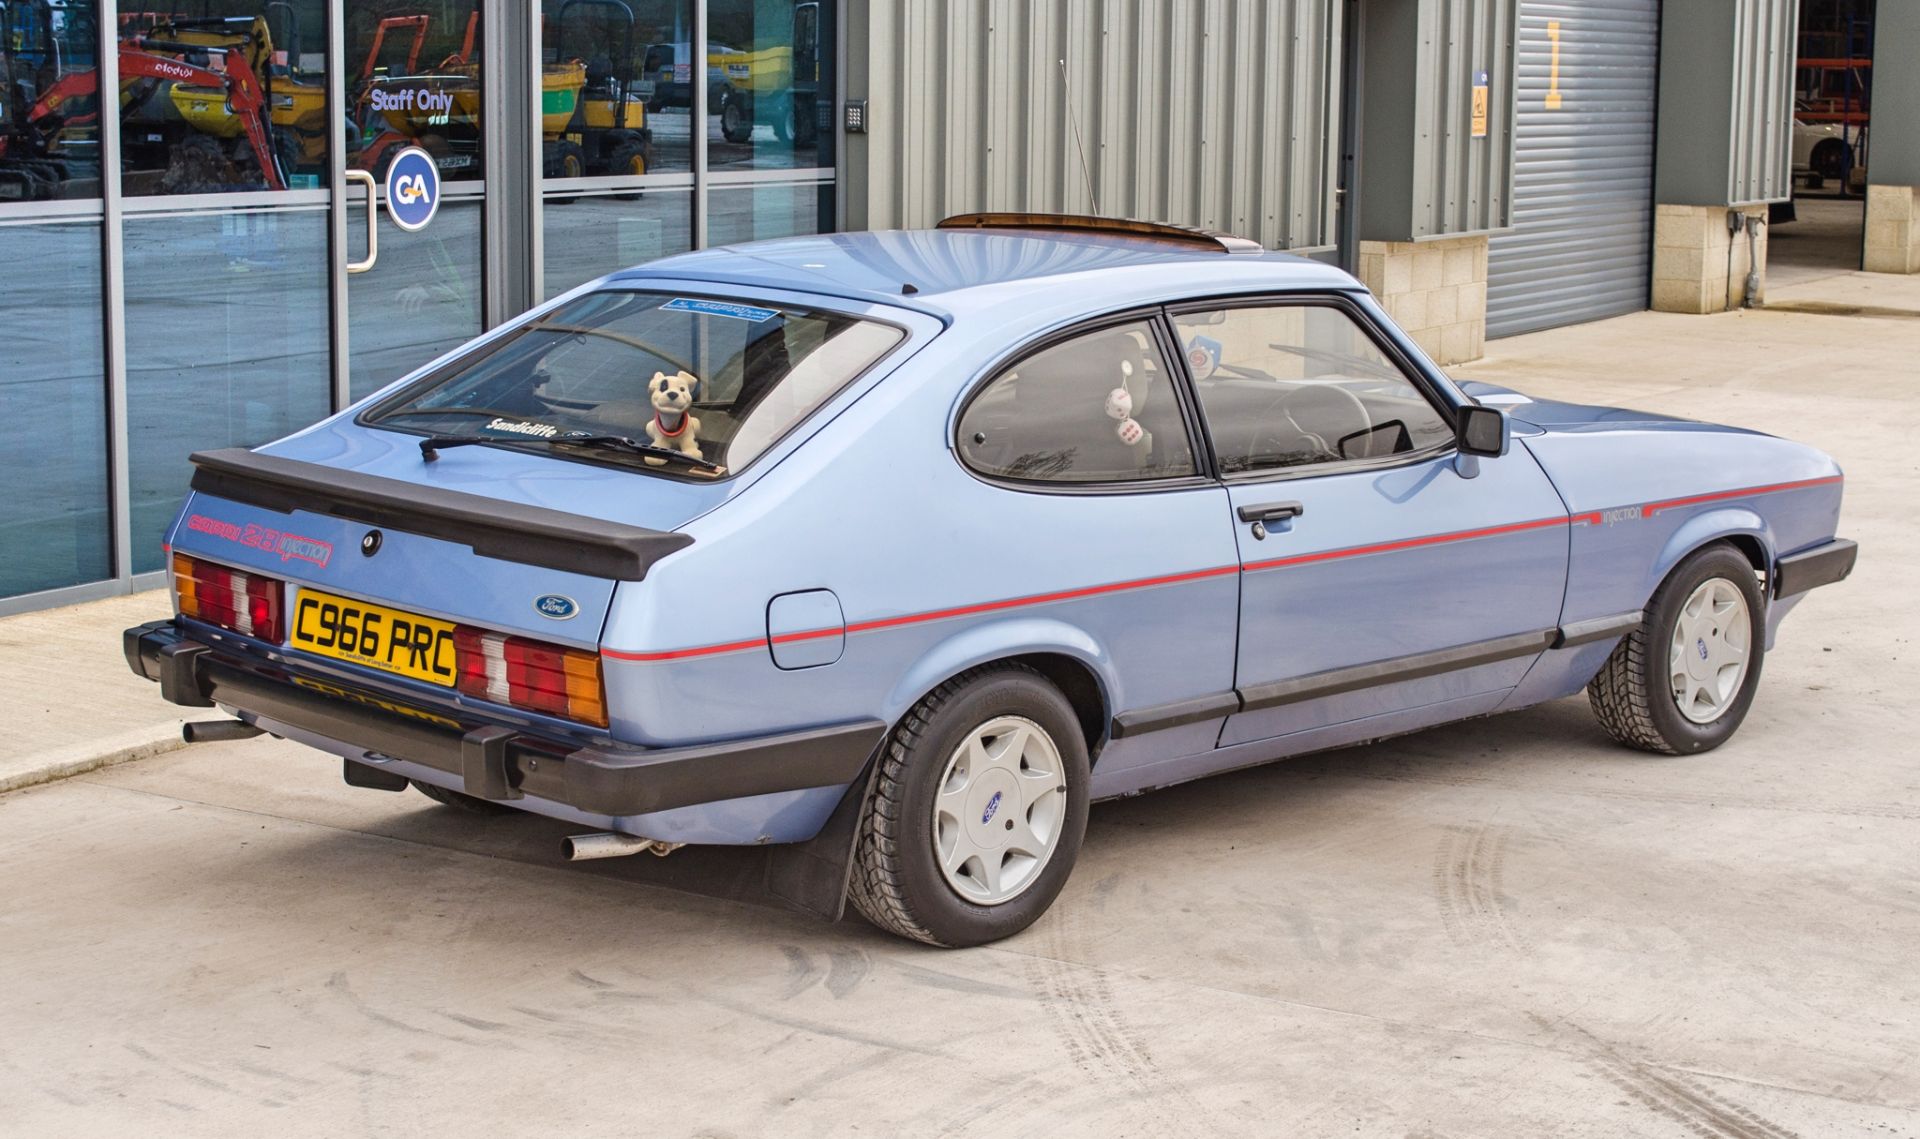 1986 Ford Capri 2.8 Injection Special 3 door coupe - Image 6 of 56